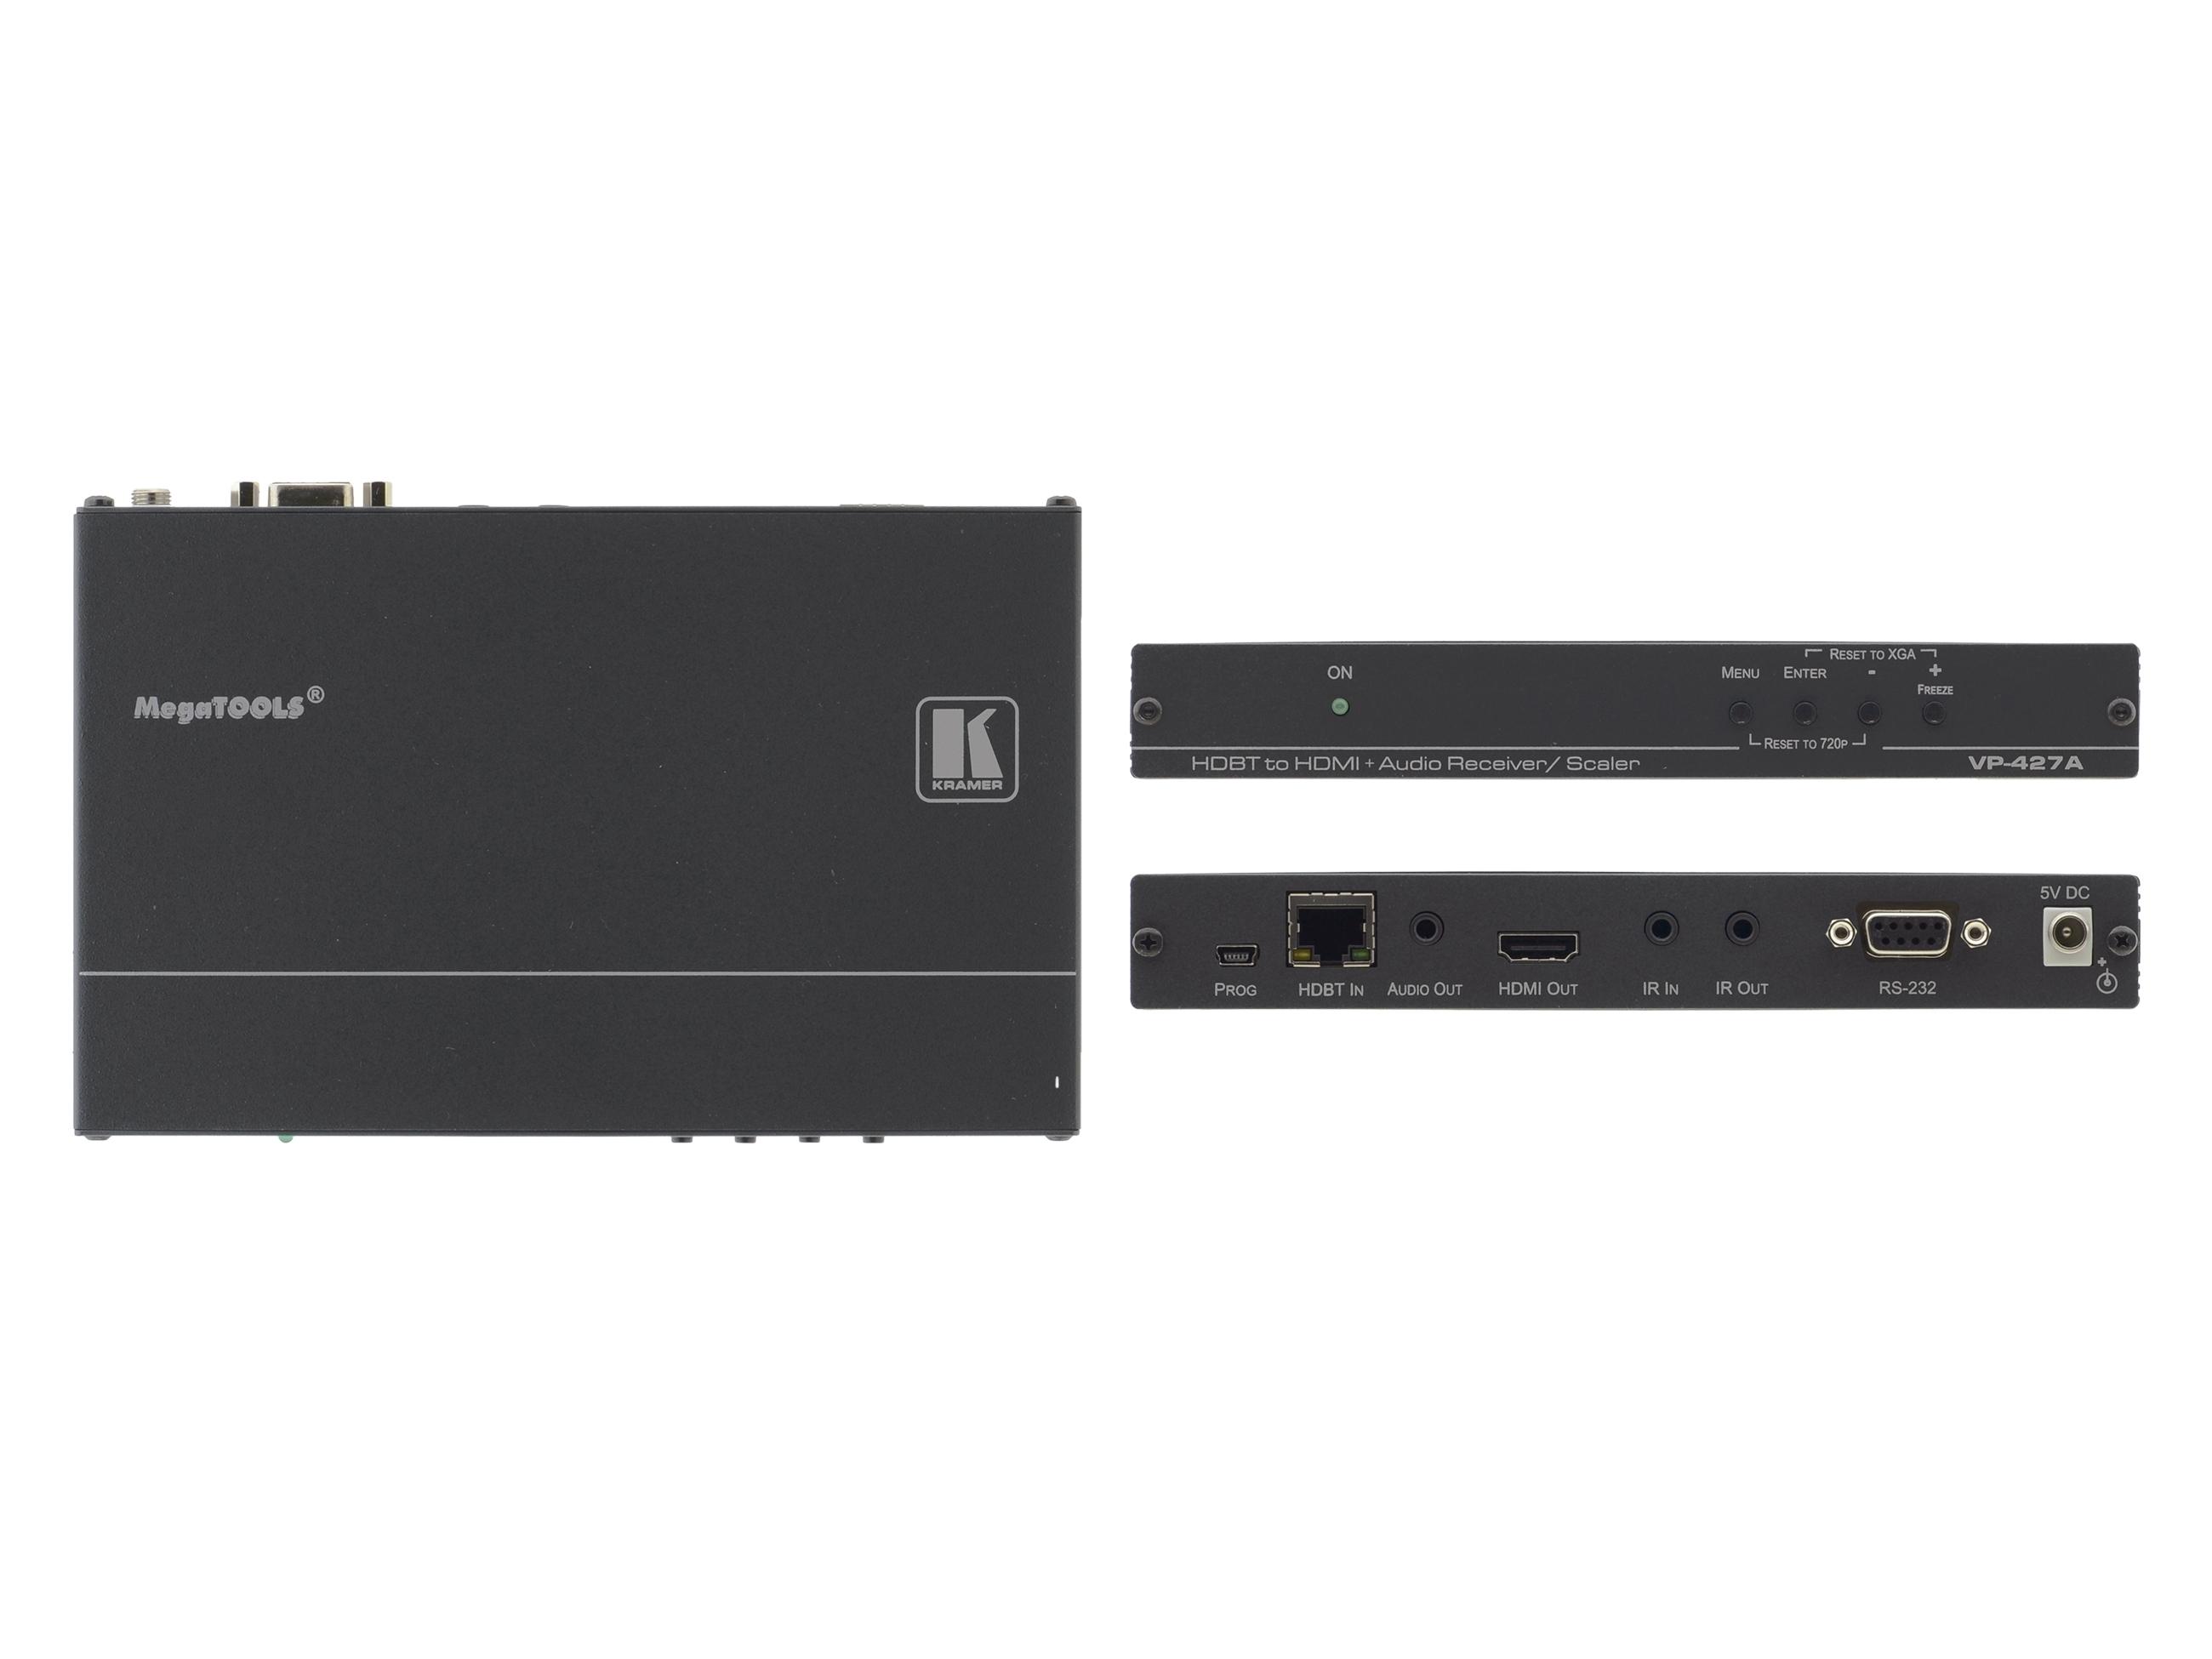 VP-427A HDBaseT to HDMI and Audio ProScale Receiver/Scaler by Kramer